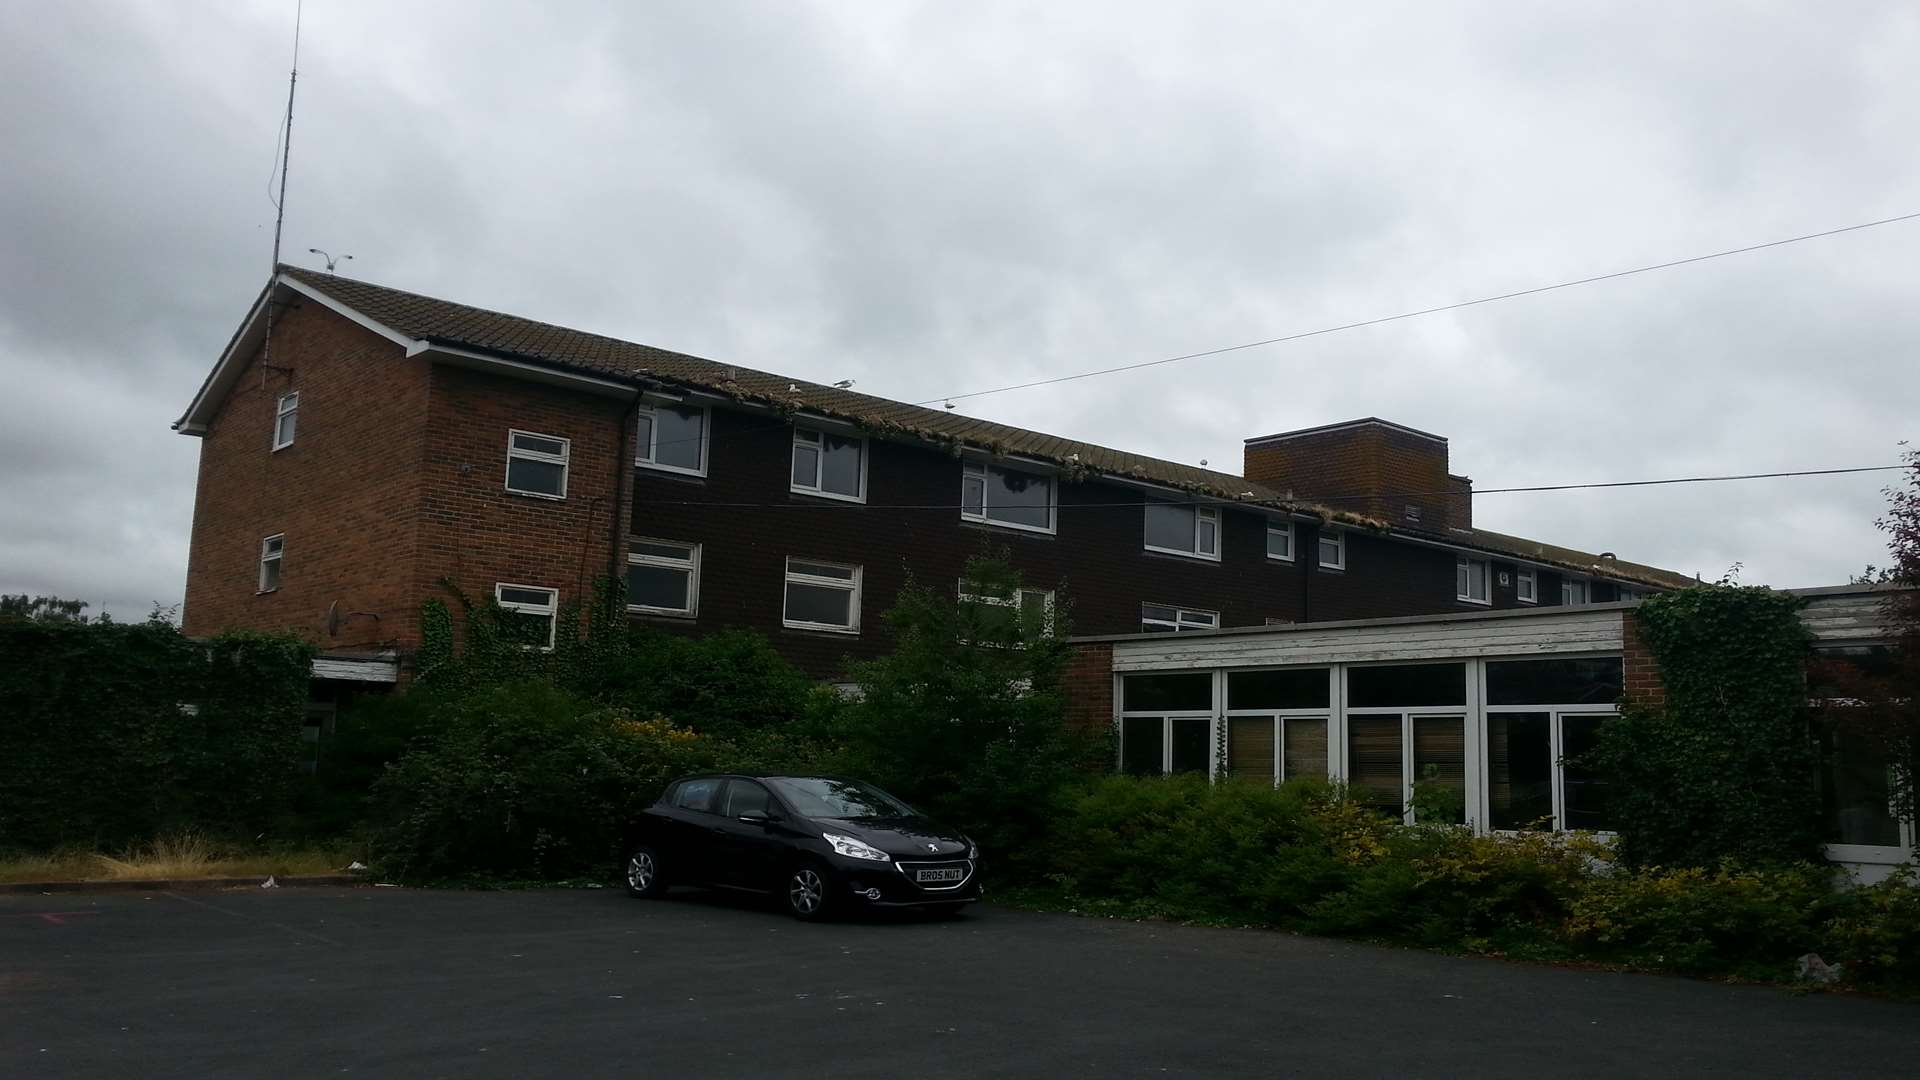 The former Ladesfield care home could be turned into a home for unaccompanied migrants